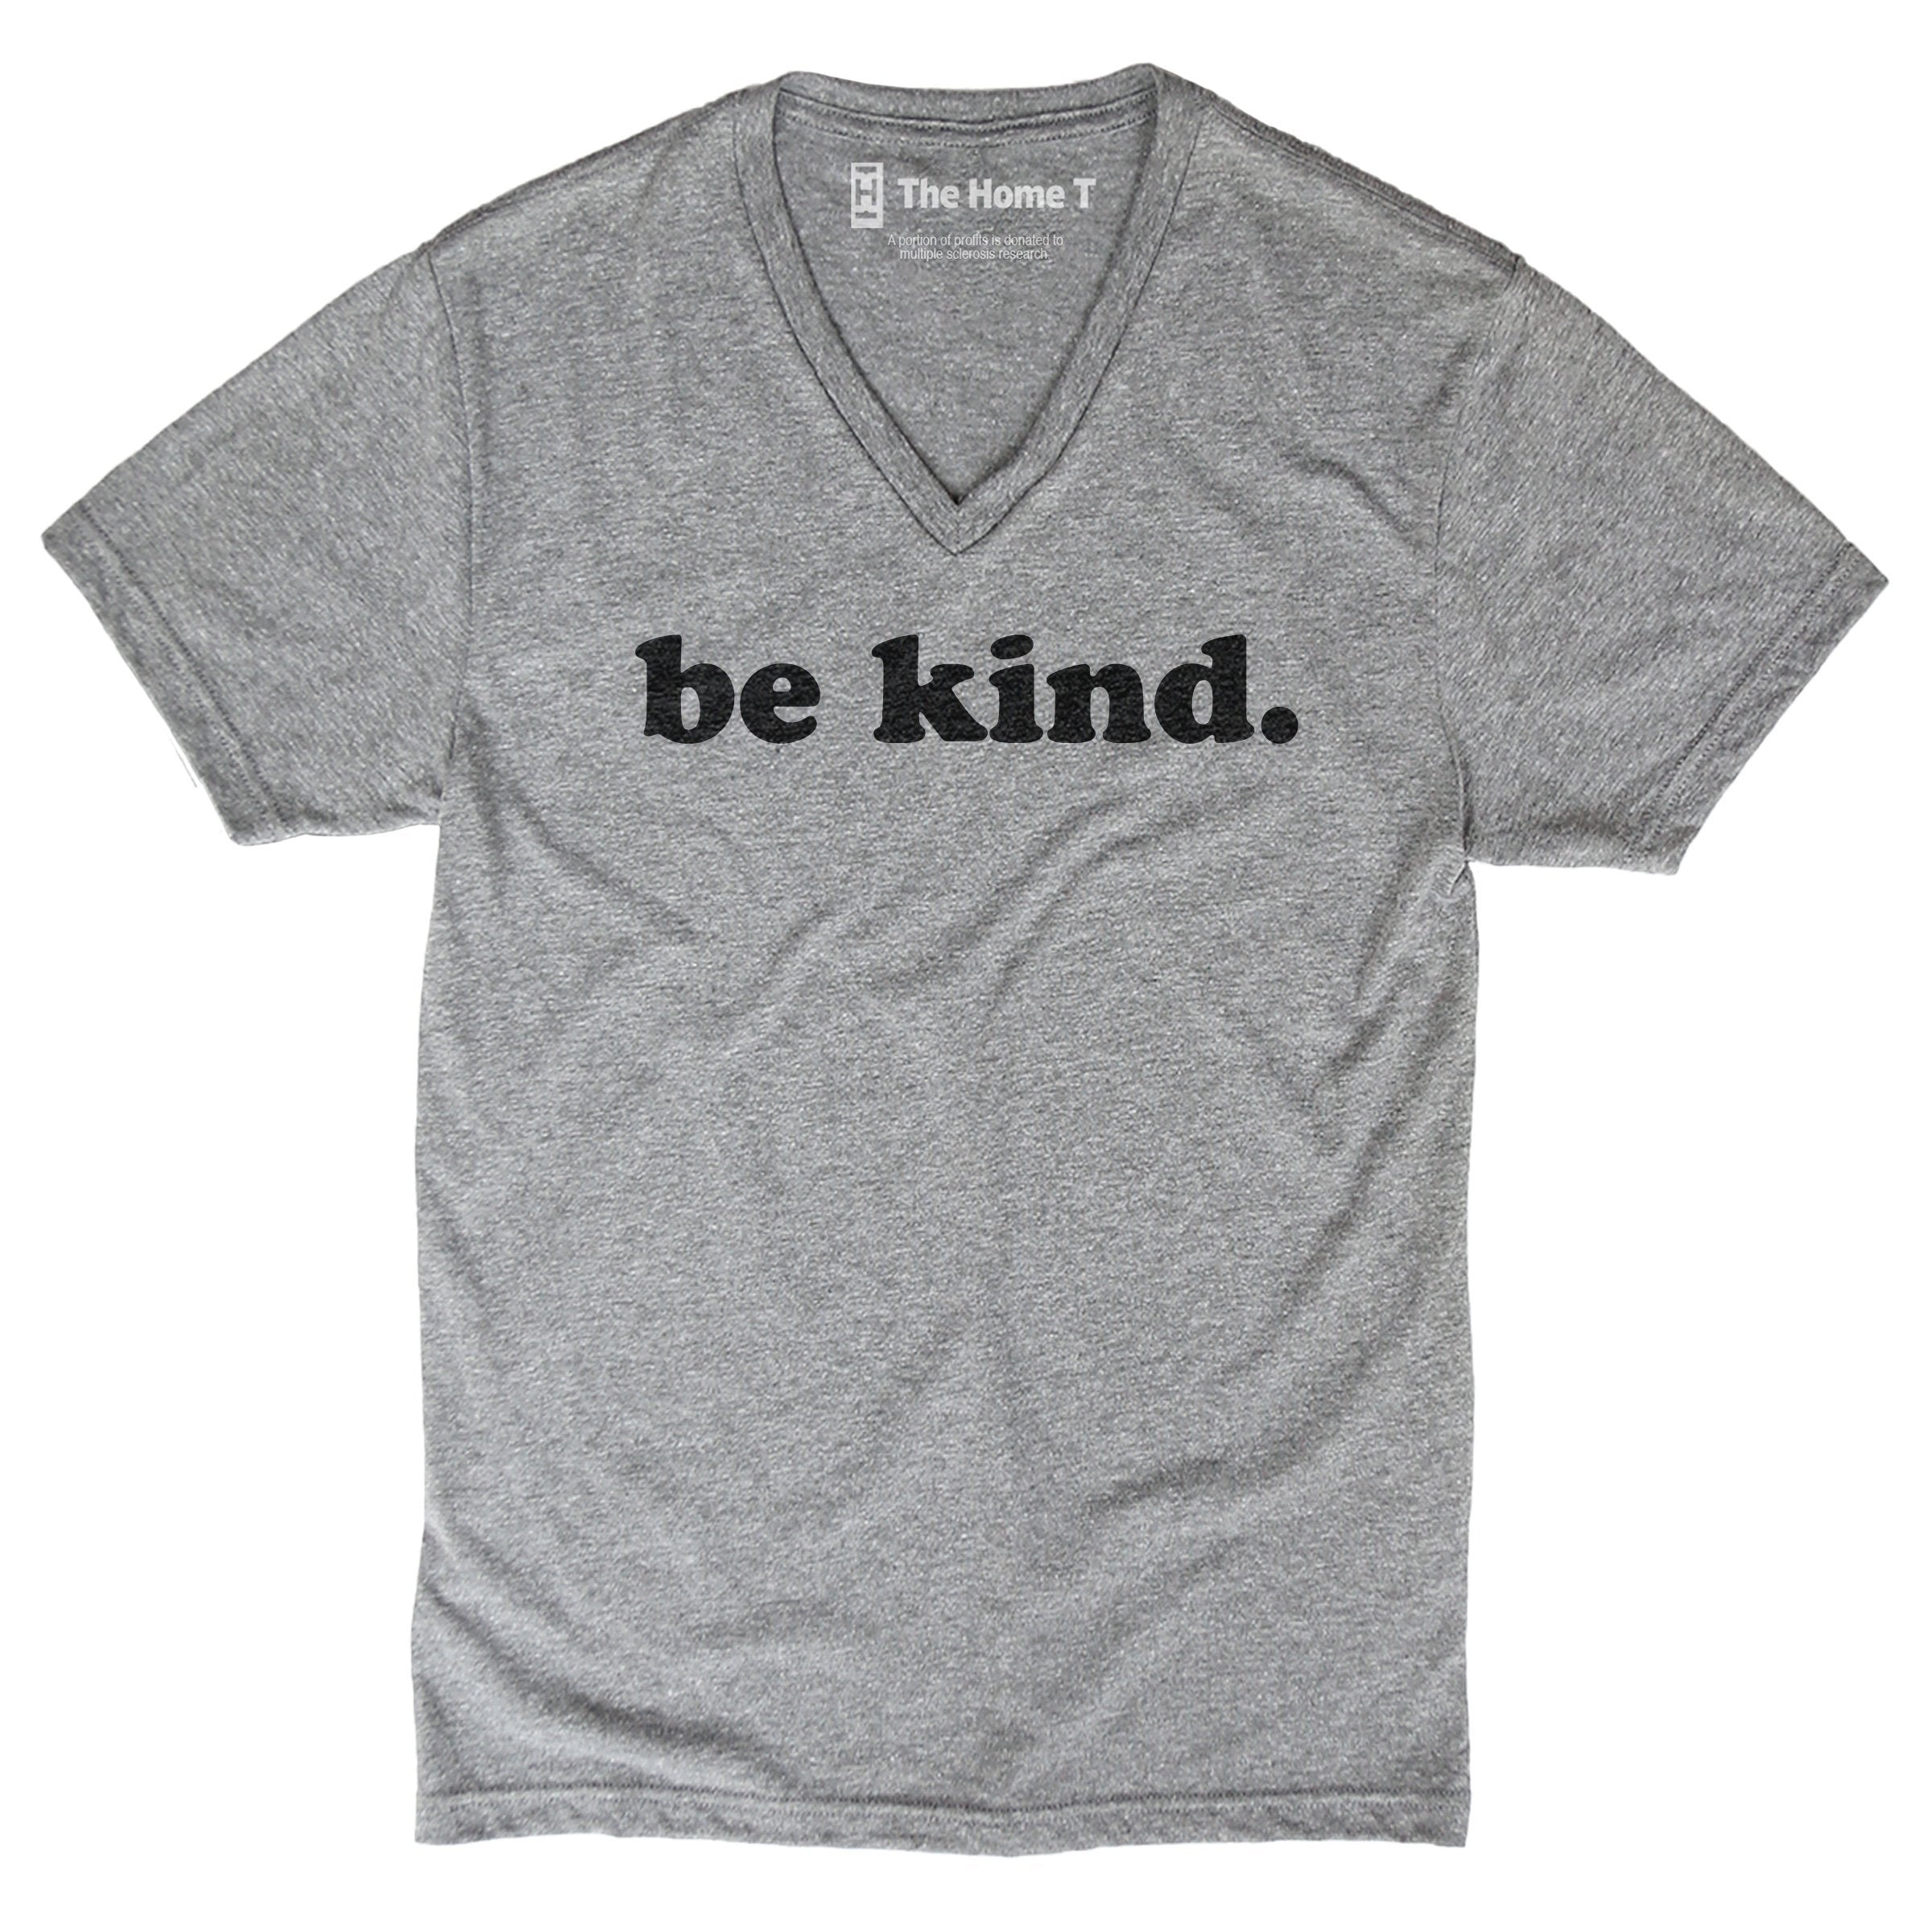 Be Kind Crew neck The Home T XS V Neck